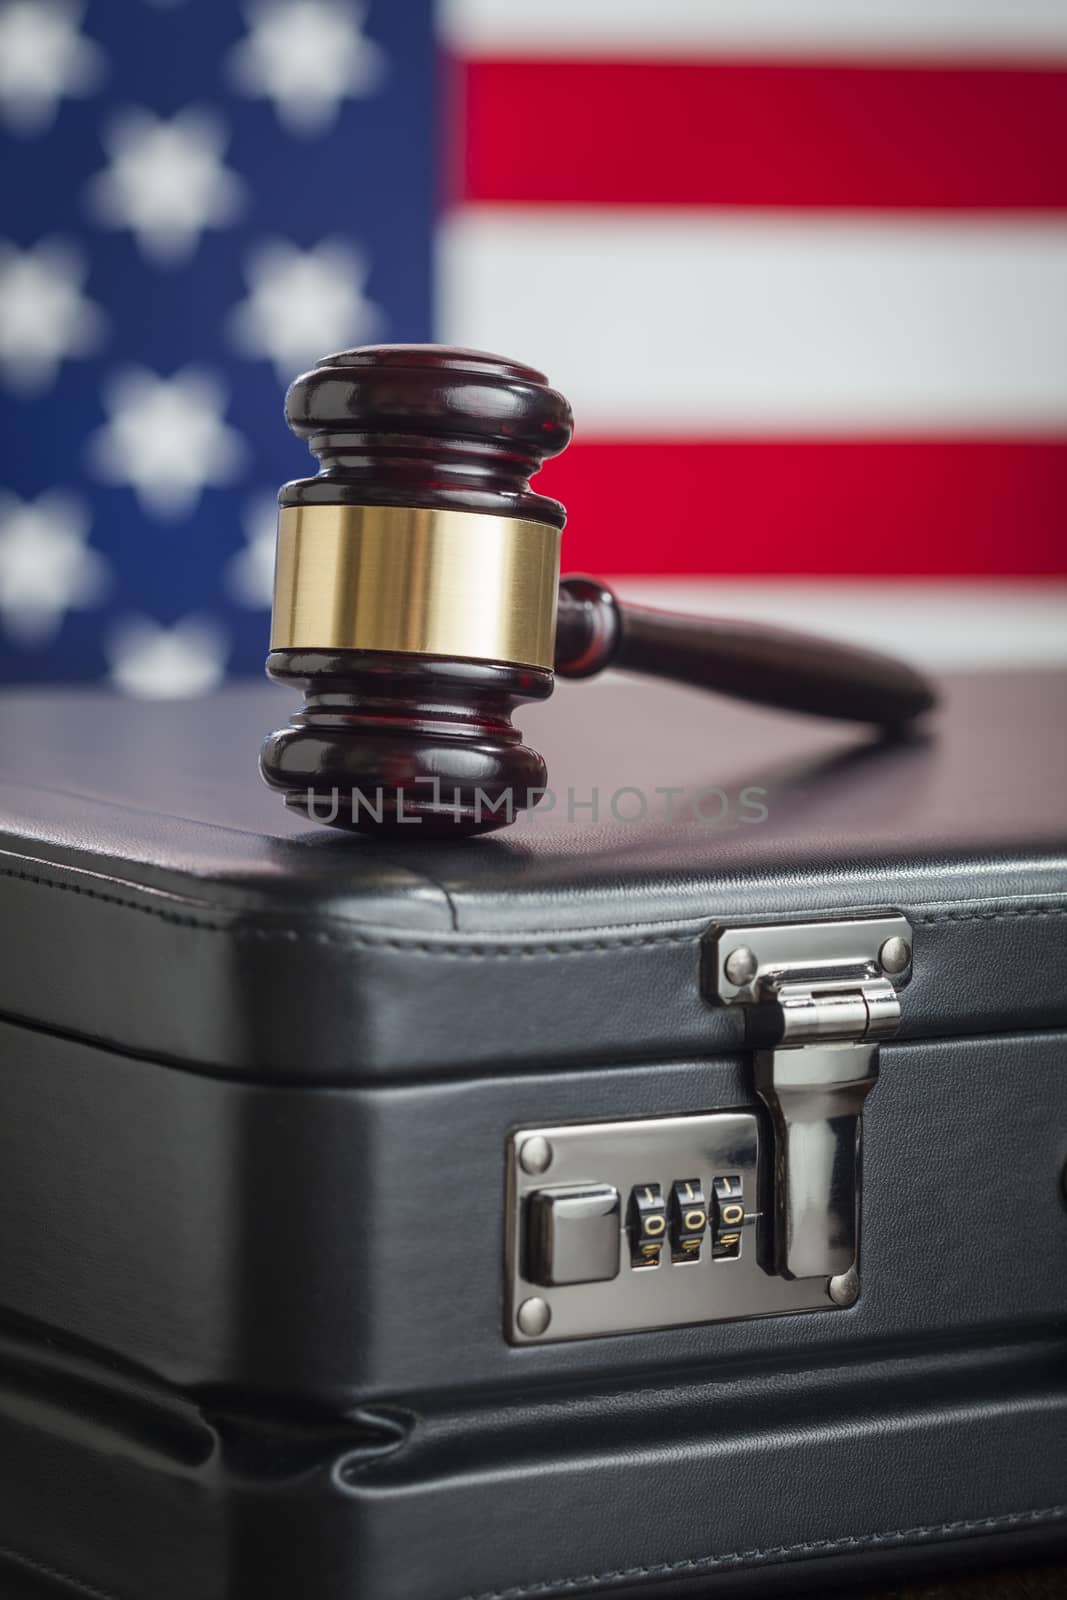 Leather Briefcase and Gavel Resting on Table with American Flag Behind.